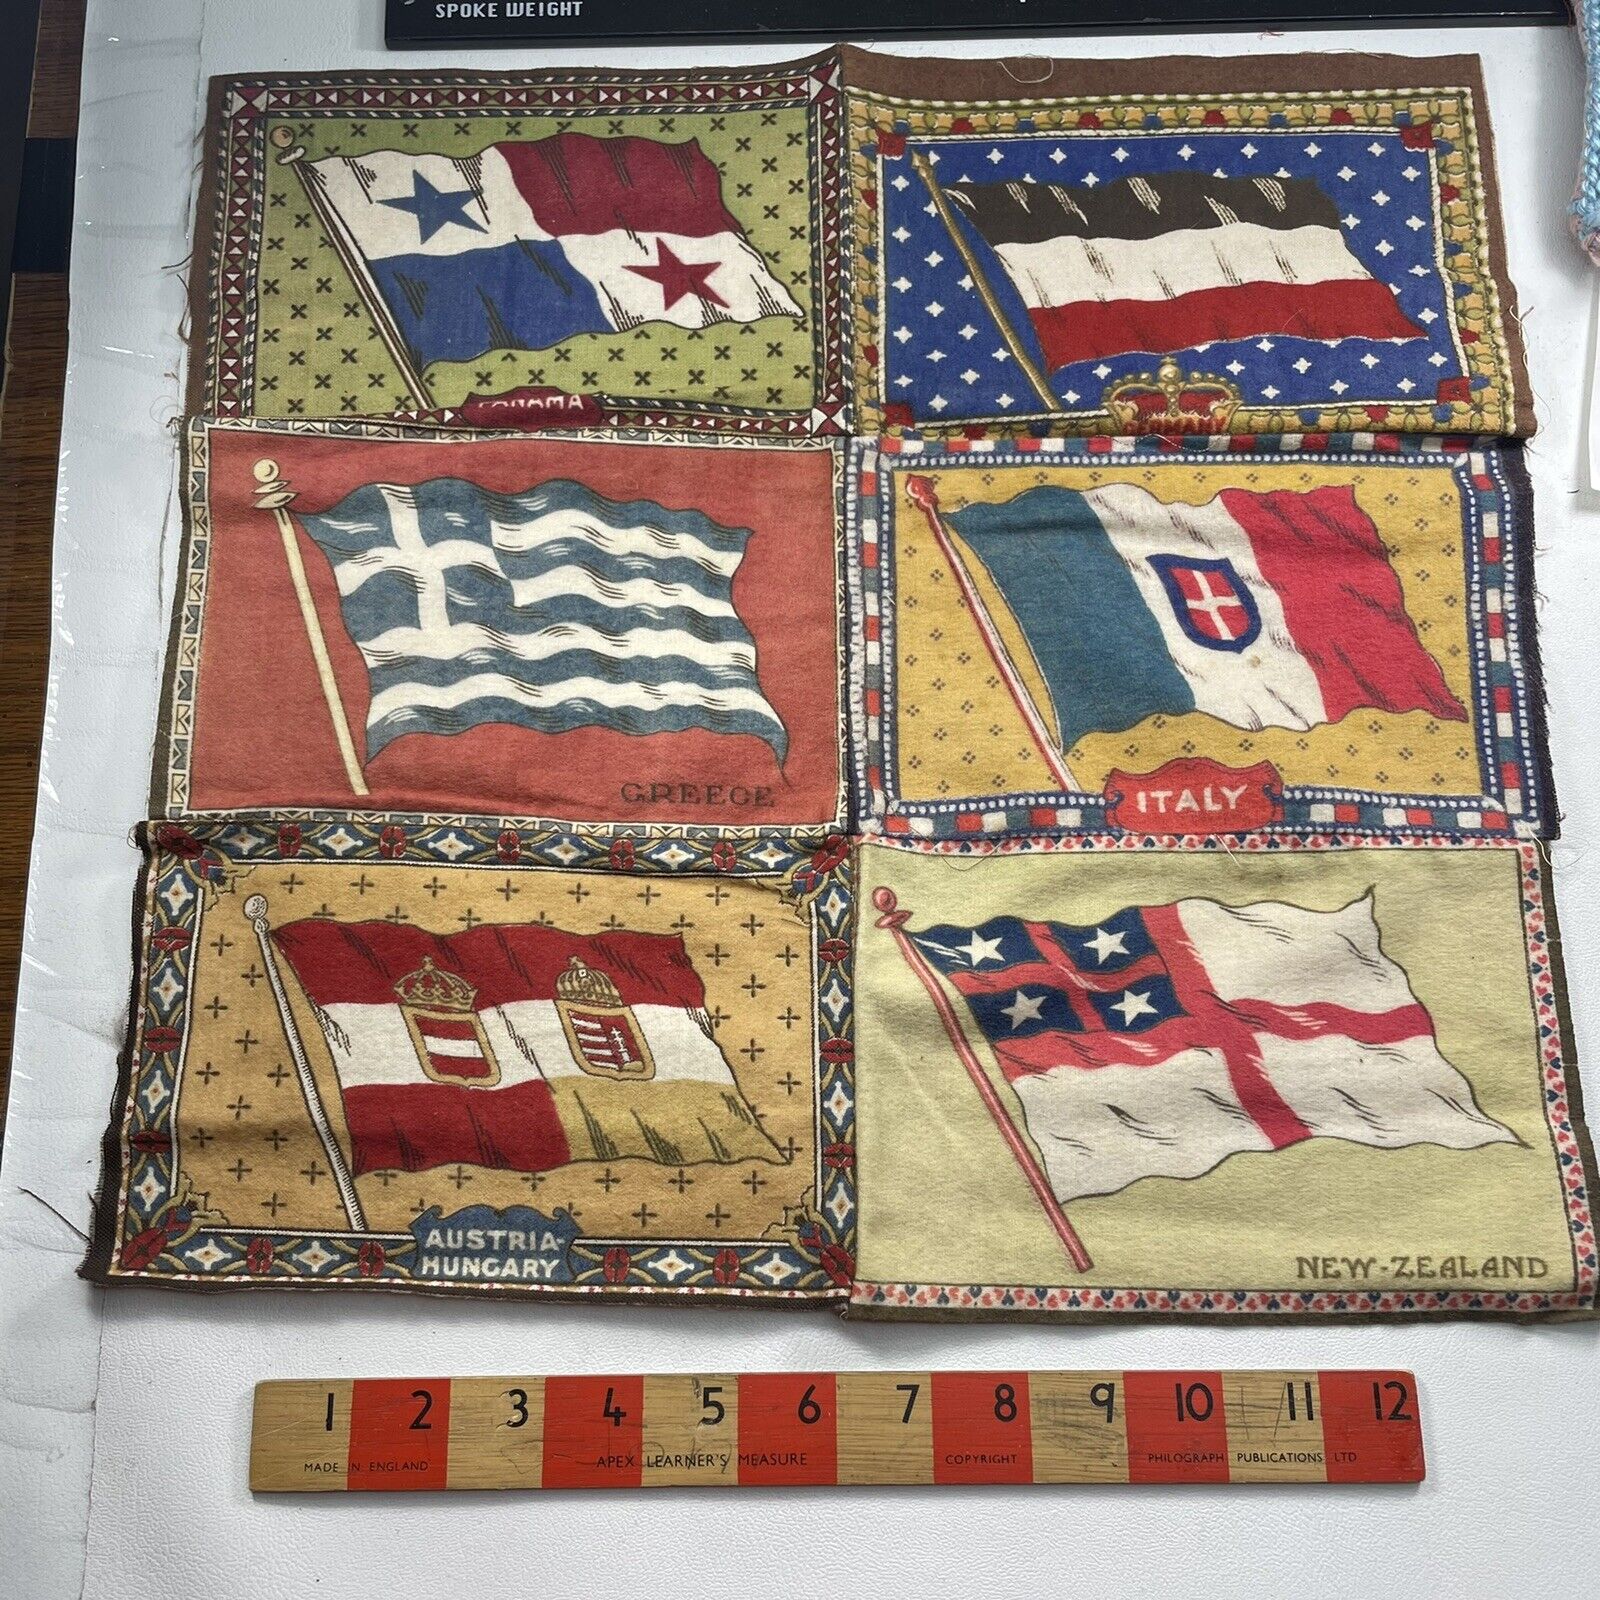 Vtg c 1910s LARGE Tobacco Felt Flag 6 Sewn Together Patches ITALY MZ GREECE+19XG